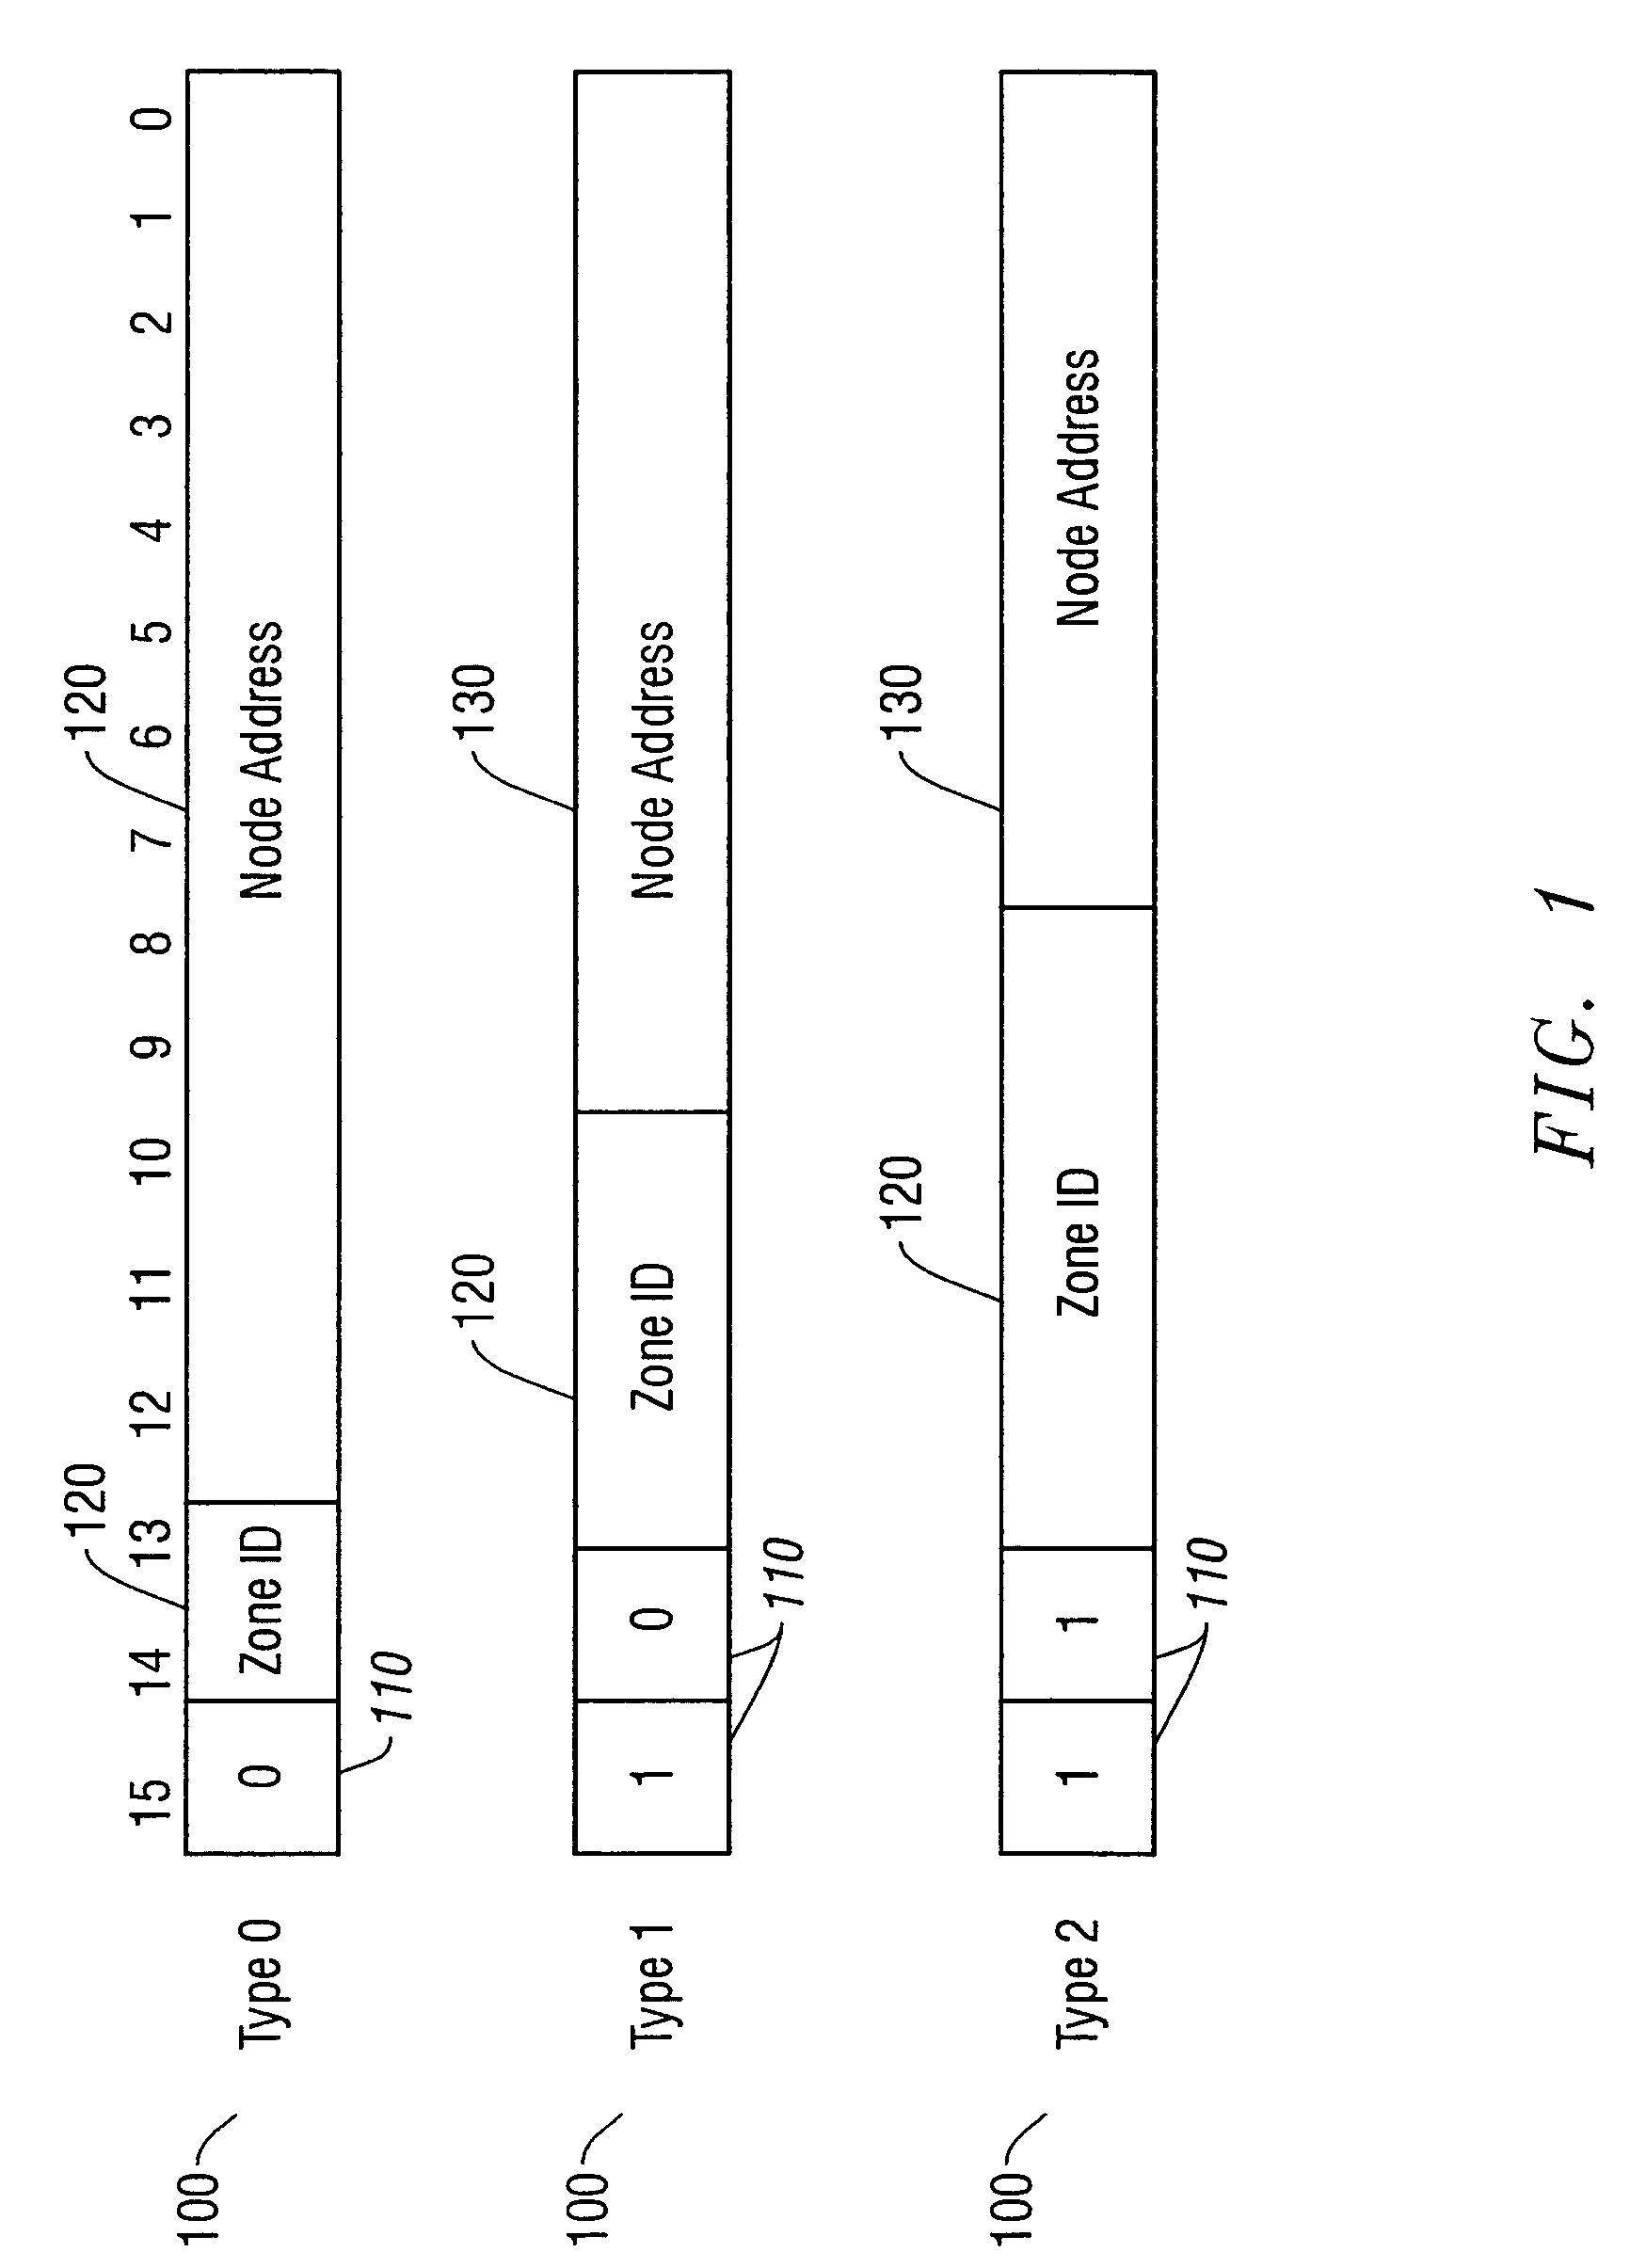 Network addressing scheme for reducing protocol overhead in an optical network